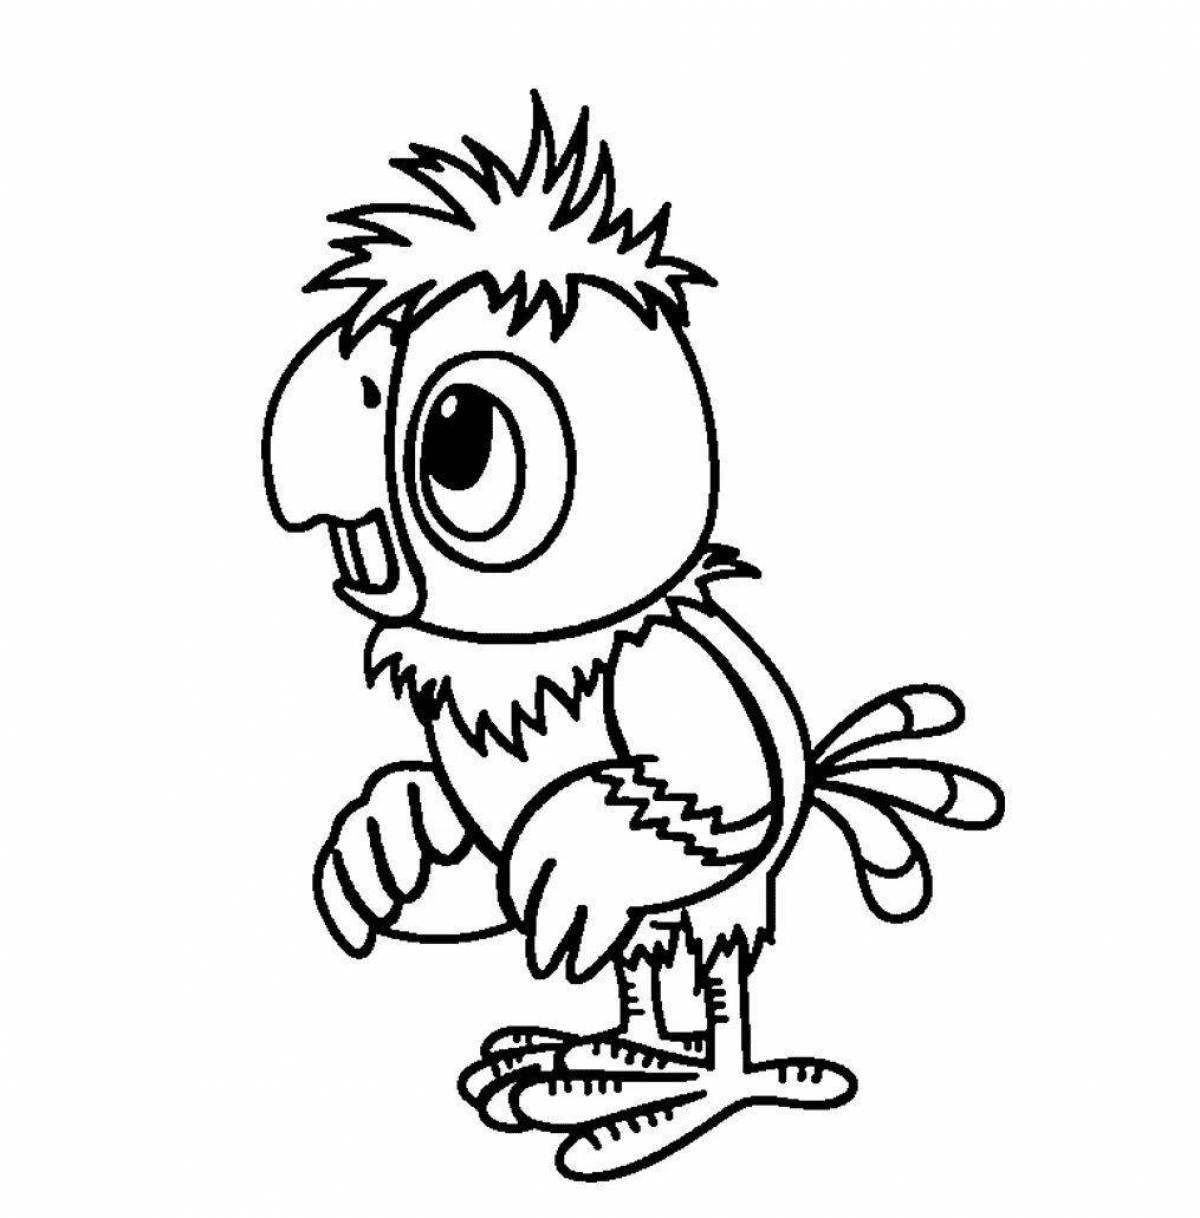 Exciting cartoon character coloring pages